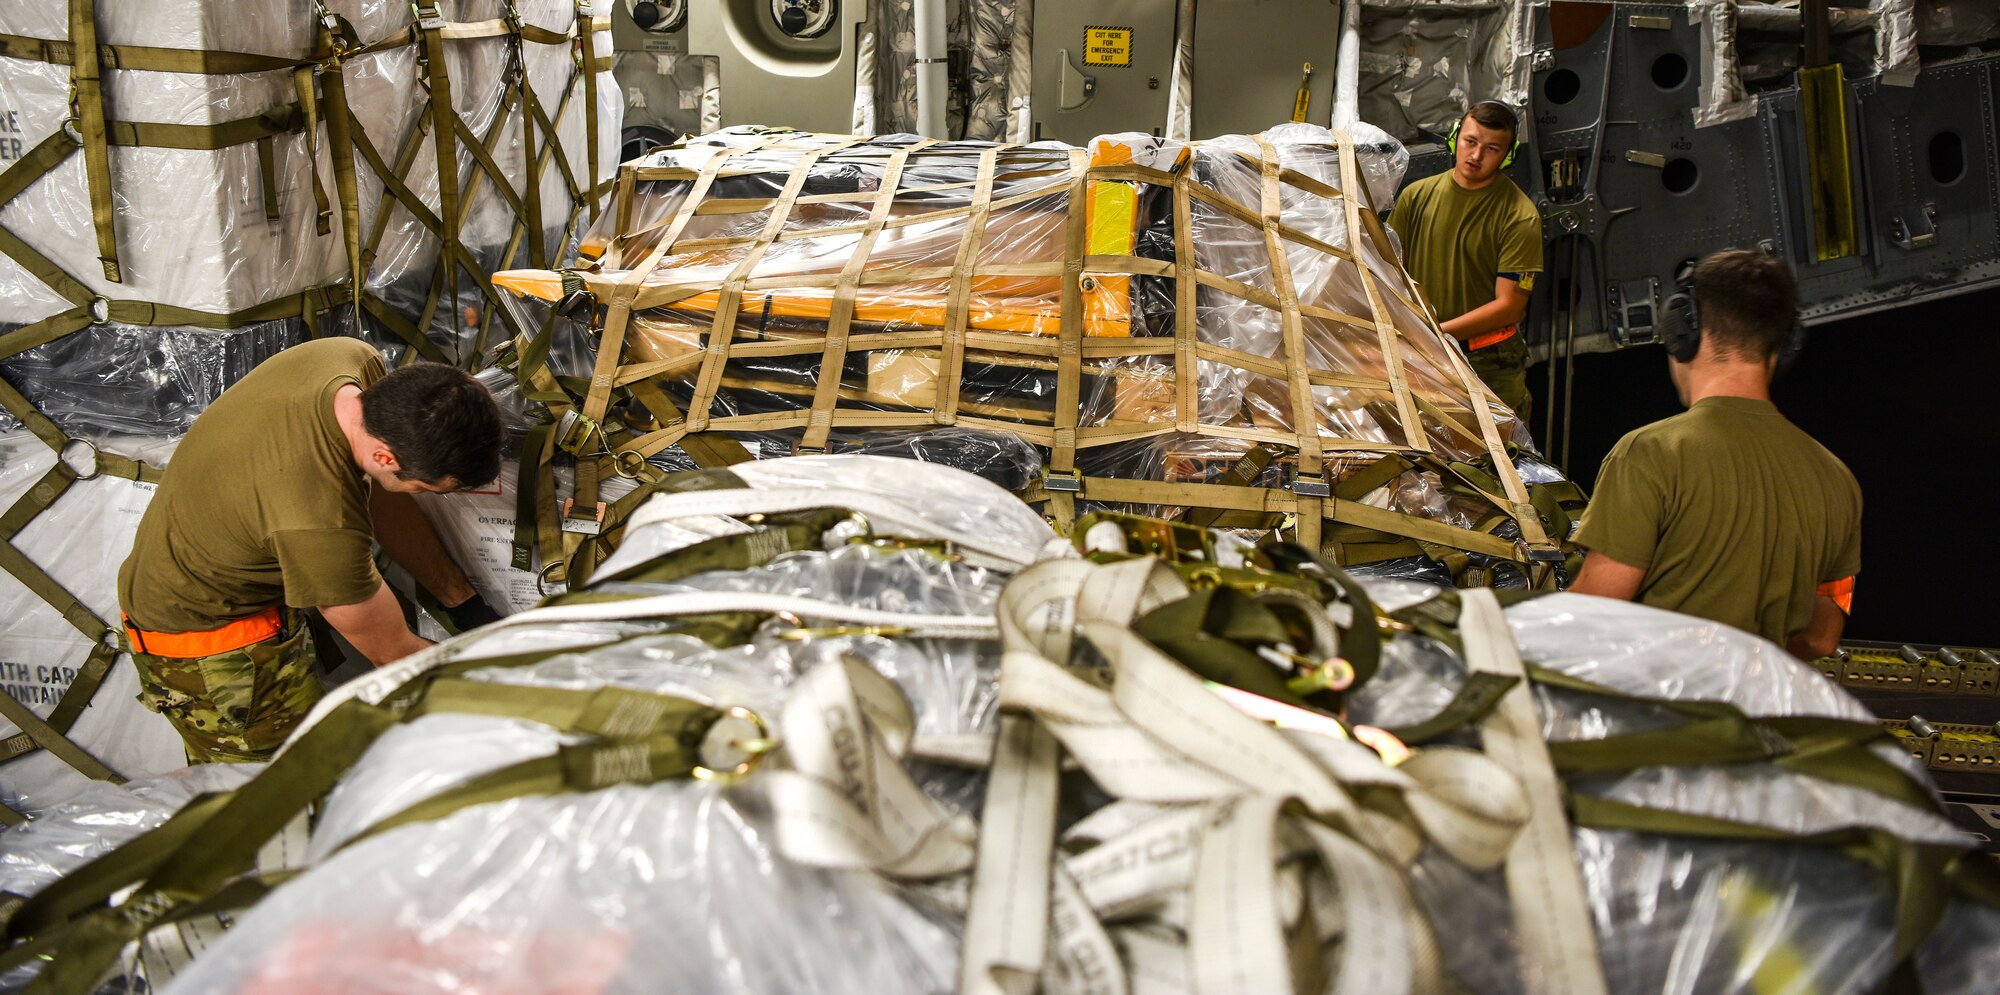 U.S. Air Force Airmen assigned to the 735th Air Mobility Squadron, secure top and side nets of a pallet at Joint Base Pearl Harbor-Hickam, Hawaii, April  3, 2020. With a 72-hour notification, the 735th AMS loaded 31,063 pounds of cargo in support of the COVID-19 response. (U.S. Air Force photo by Tech. Sgt. Anthony Nelson Jr.)